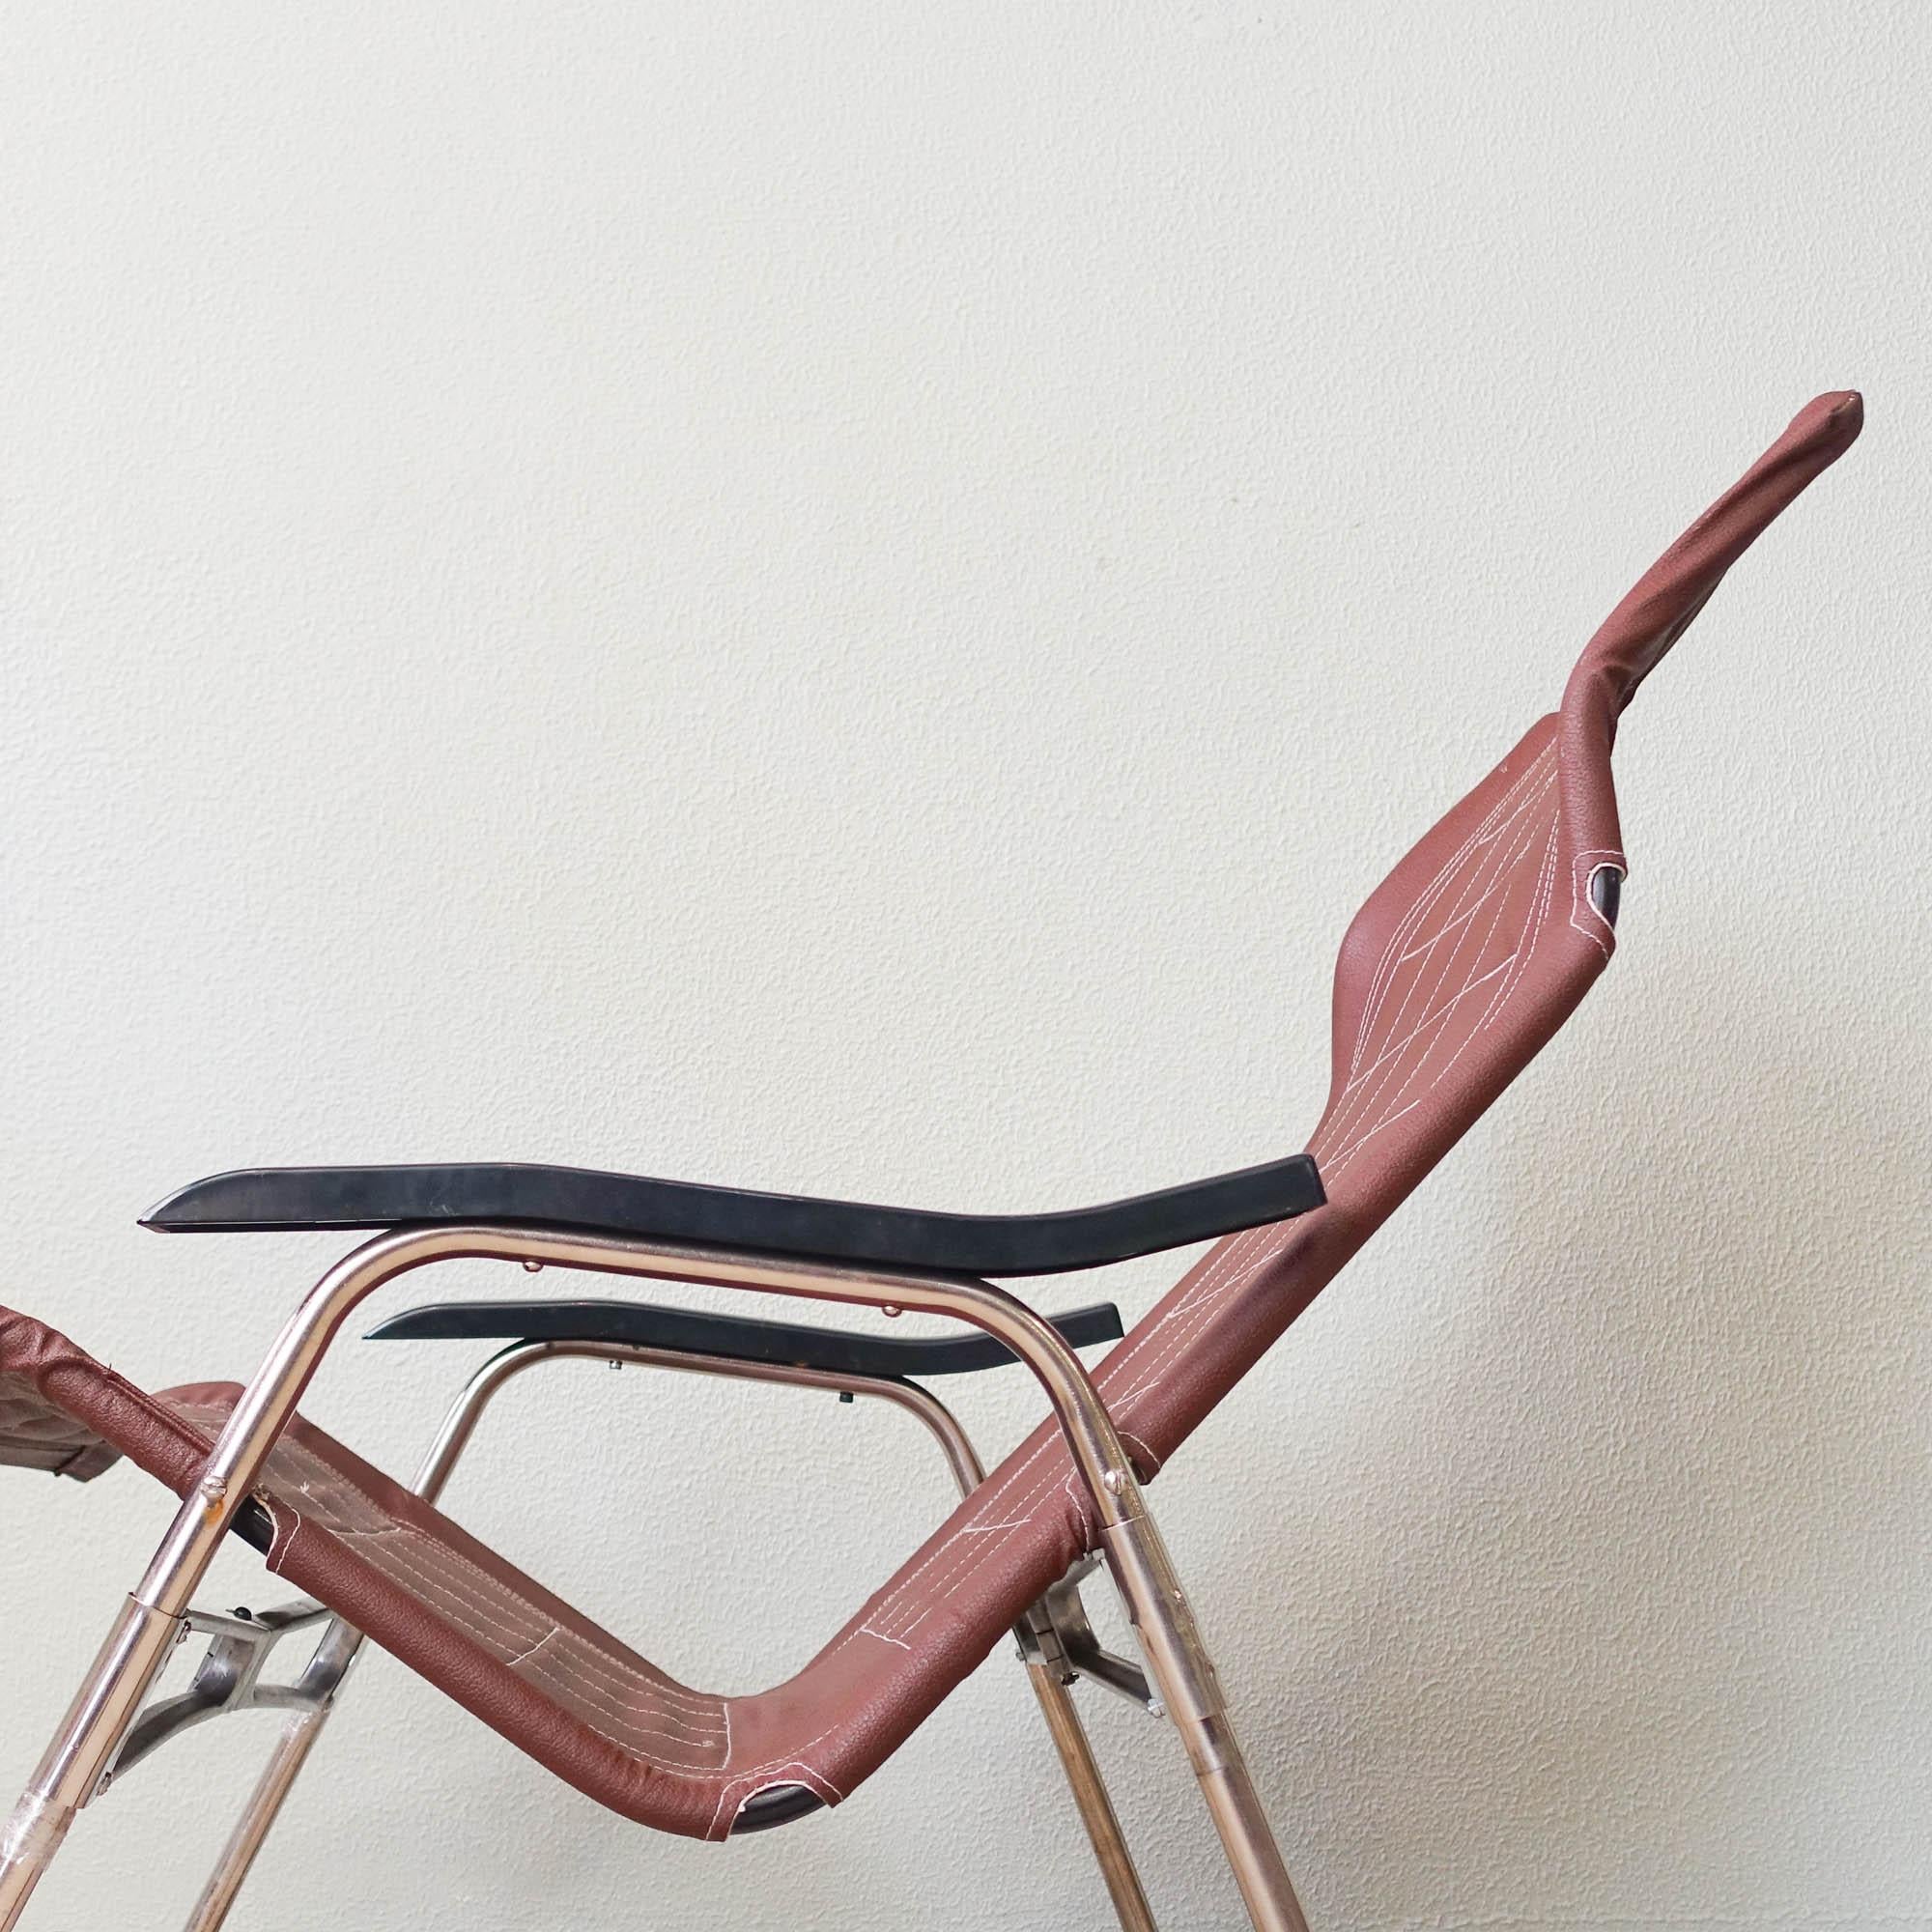 Aluminum Japanese Foldable Rocking Chair by Takeshi Nii, 1950's For Sale